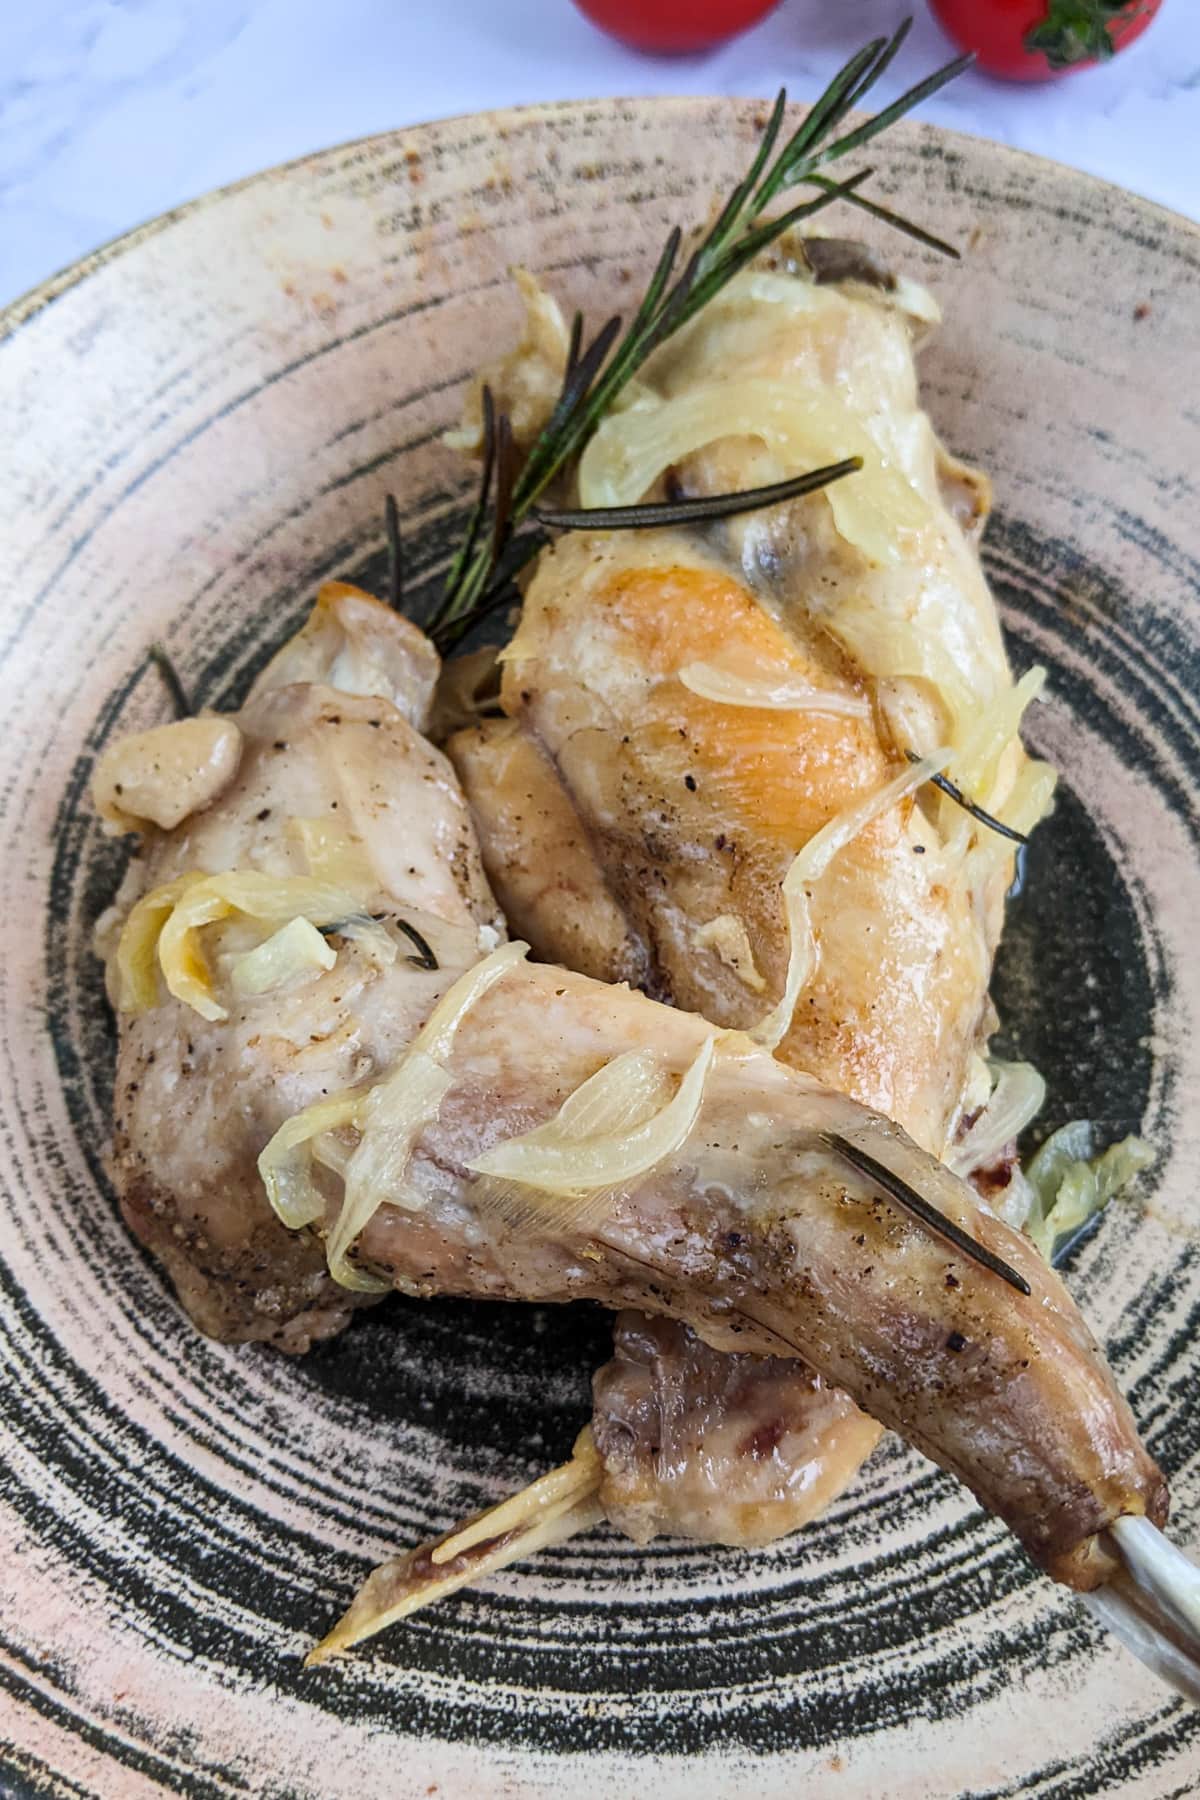 Juicy rabbit with rosemary and onions on a plate.